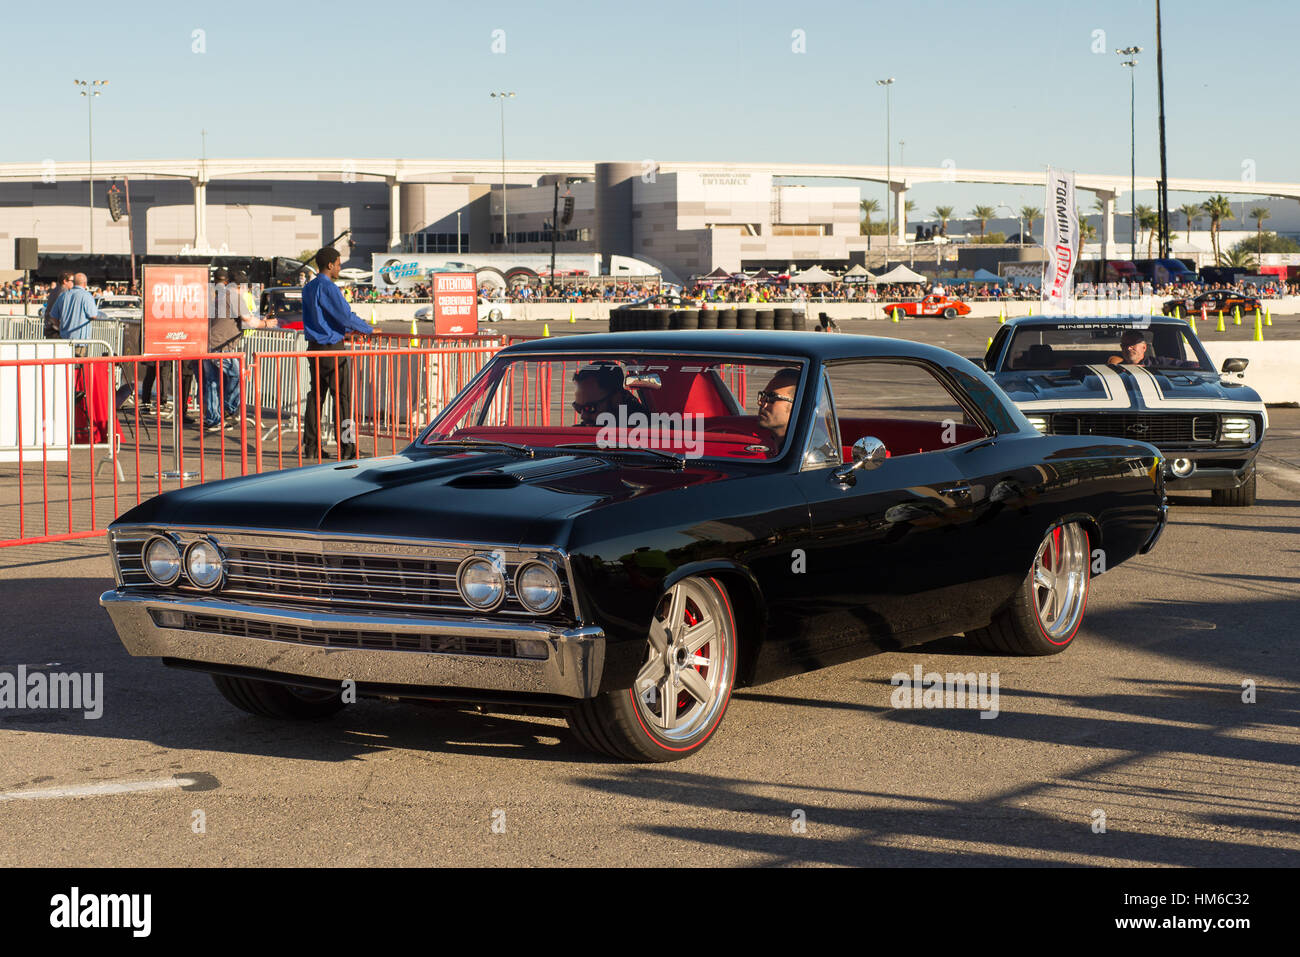 Roadster Shop's 1967 Chevrolet Chevelle followed by the Ringbrothers 1969 Camaro cars at SEMA. Stock Photo